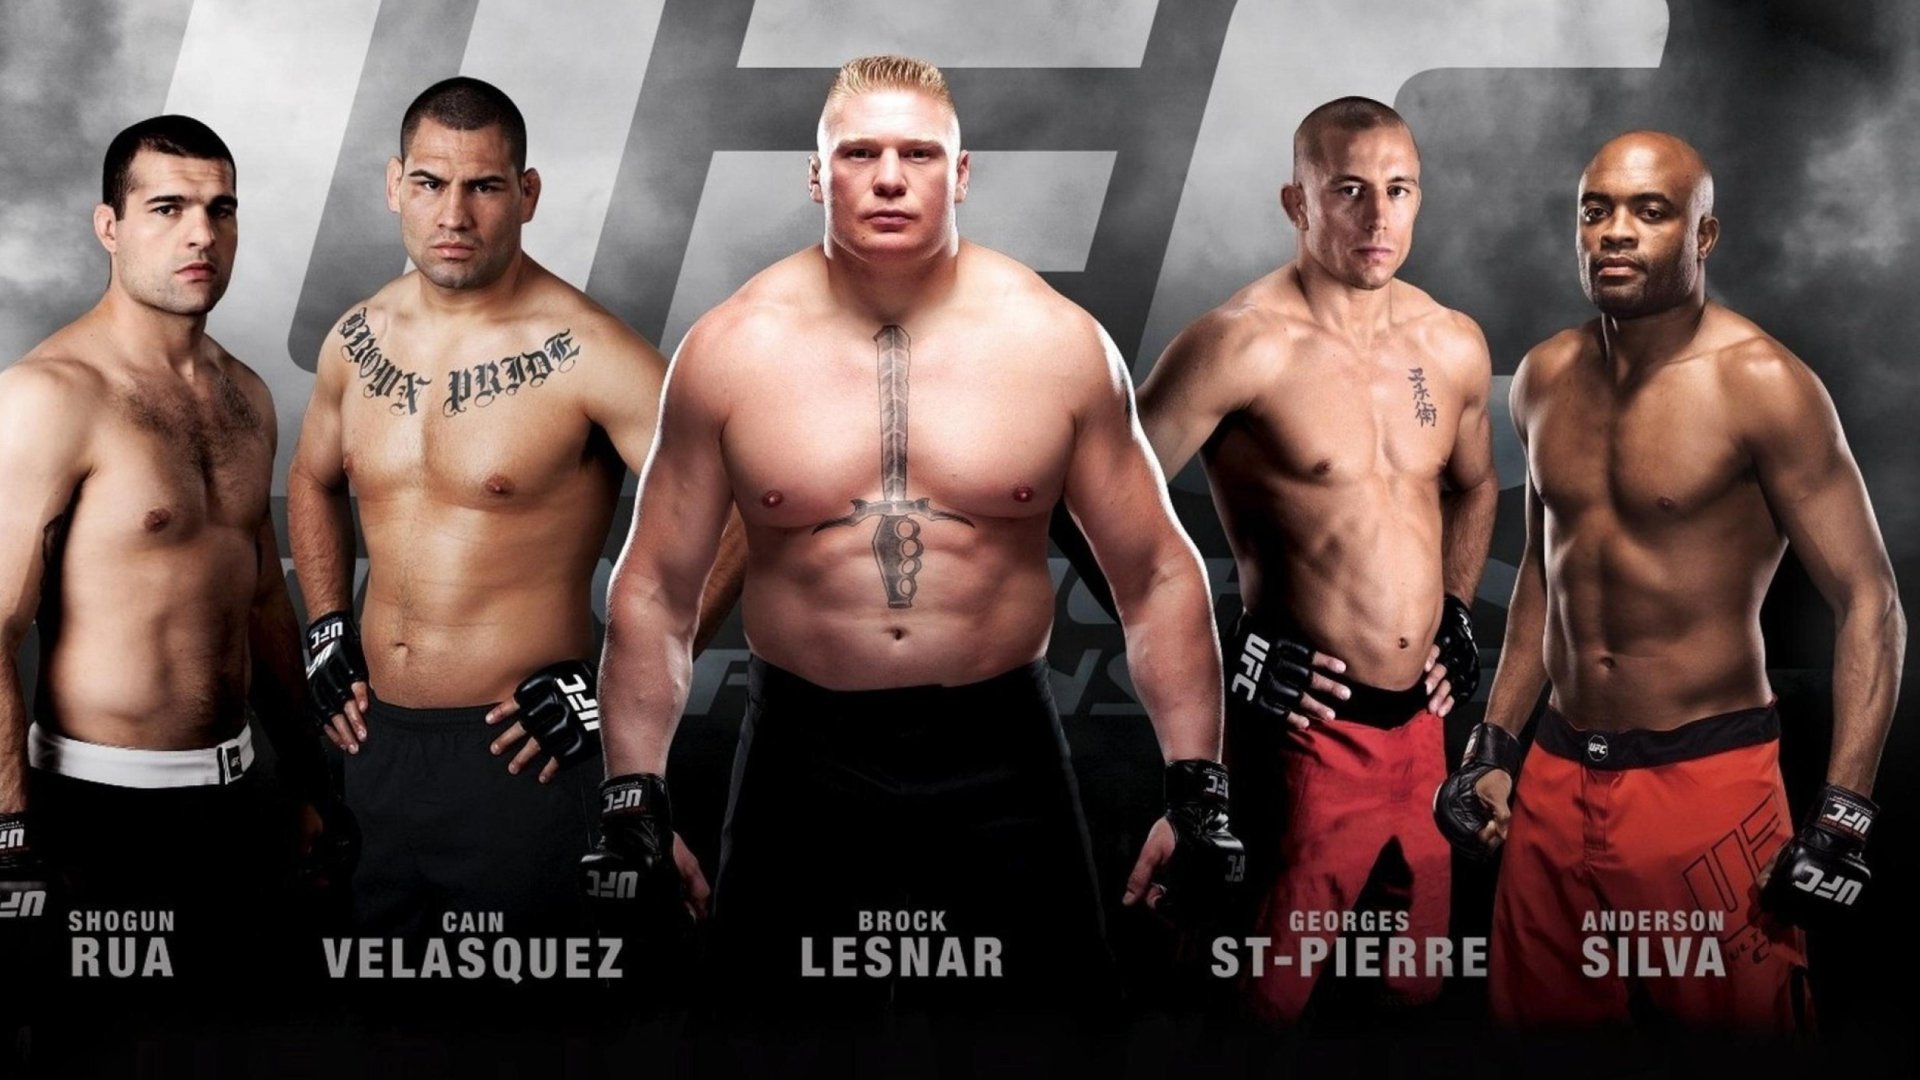 ufc, Mma, Fighting, Martial, Arts, Wrestling, Boxing Wallpapers HD